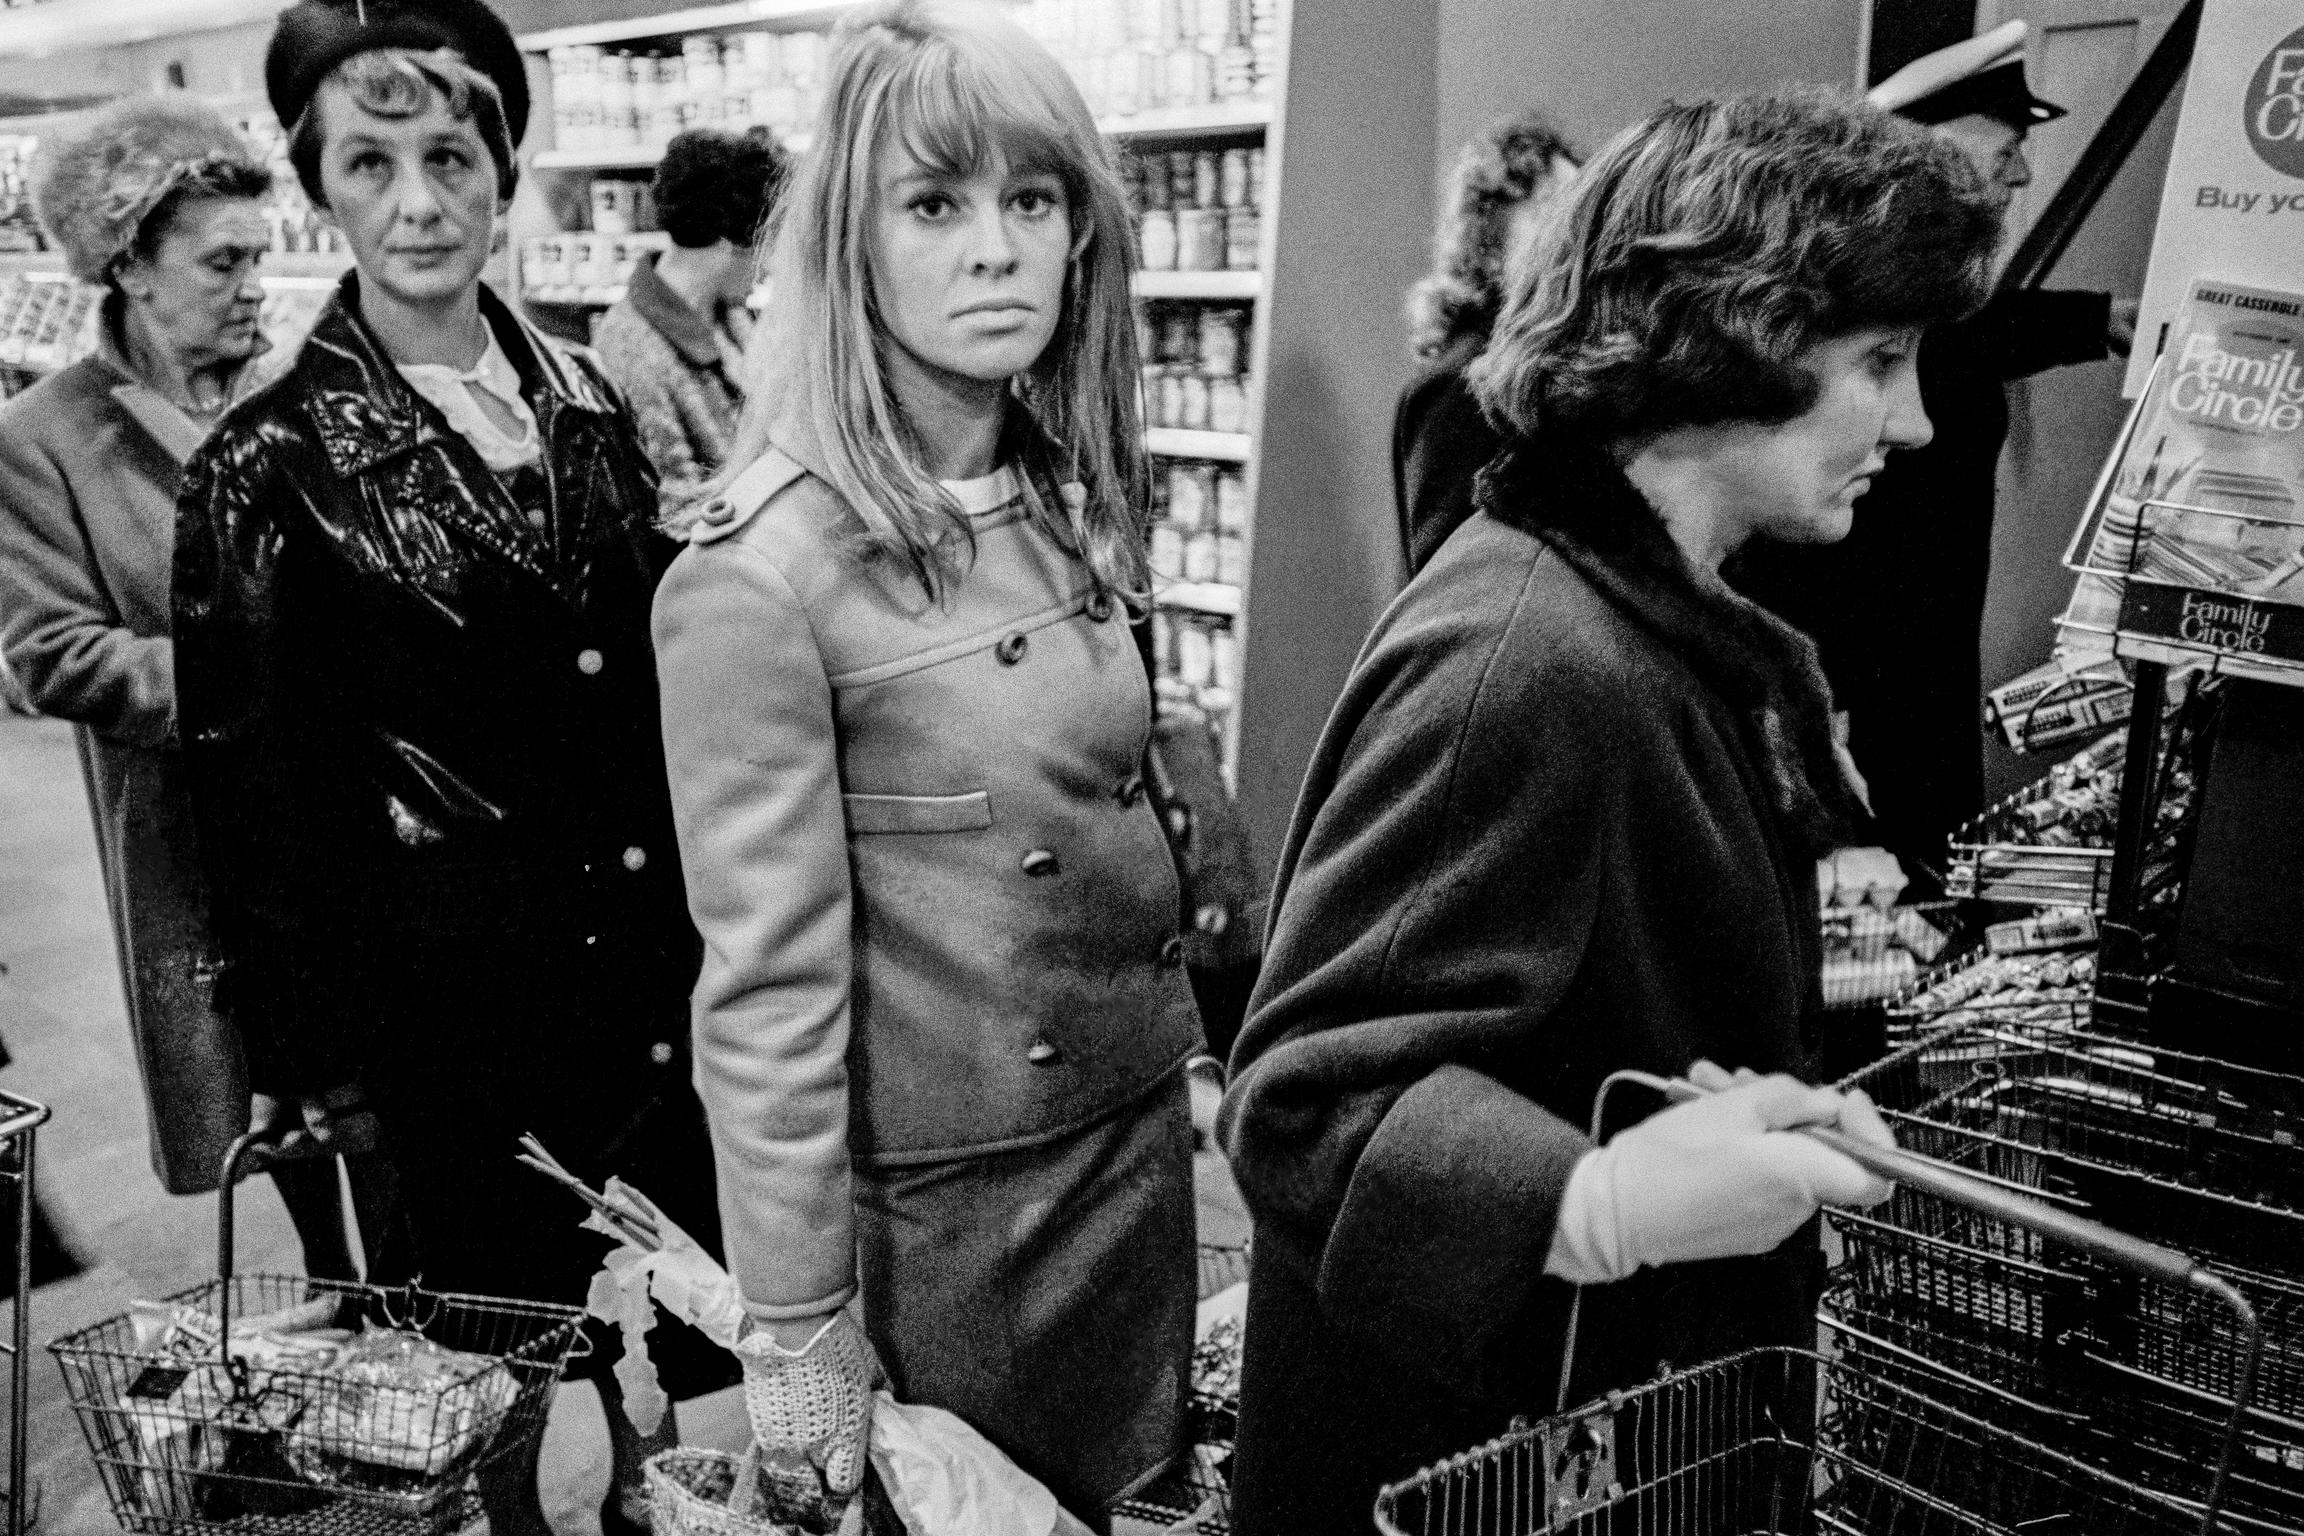 Actress Julie Christie shopping in her local store. London, UK